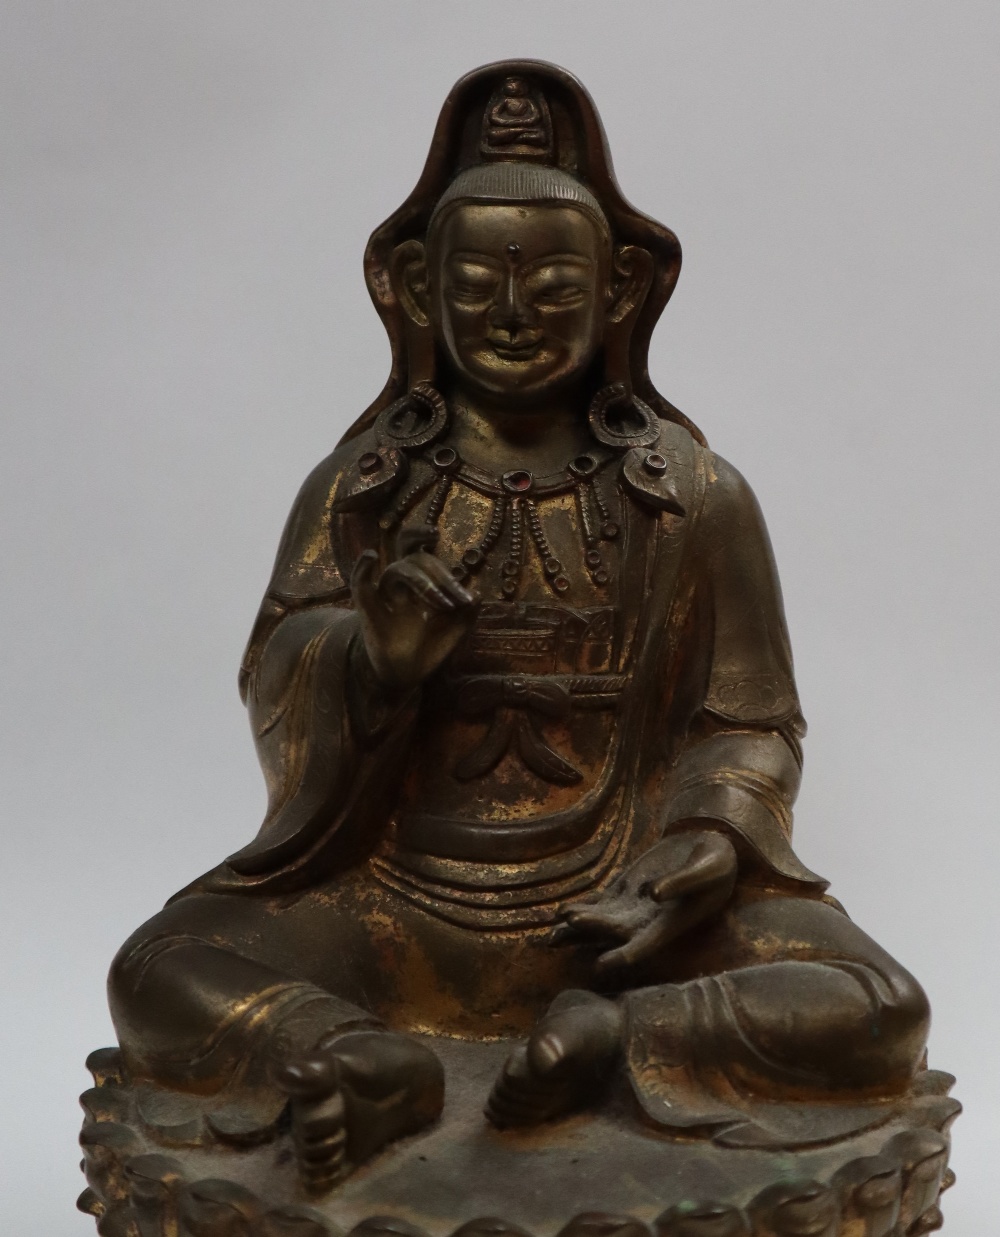 A Bronze figure of Quan yin, seated with right hand raised and left hand resting on her leg, - Image 7 of 9